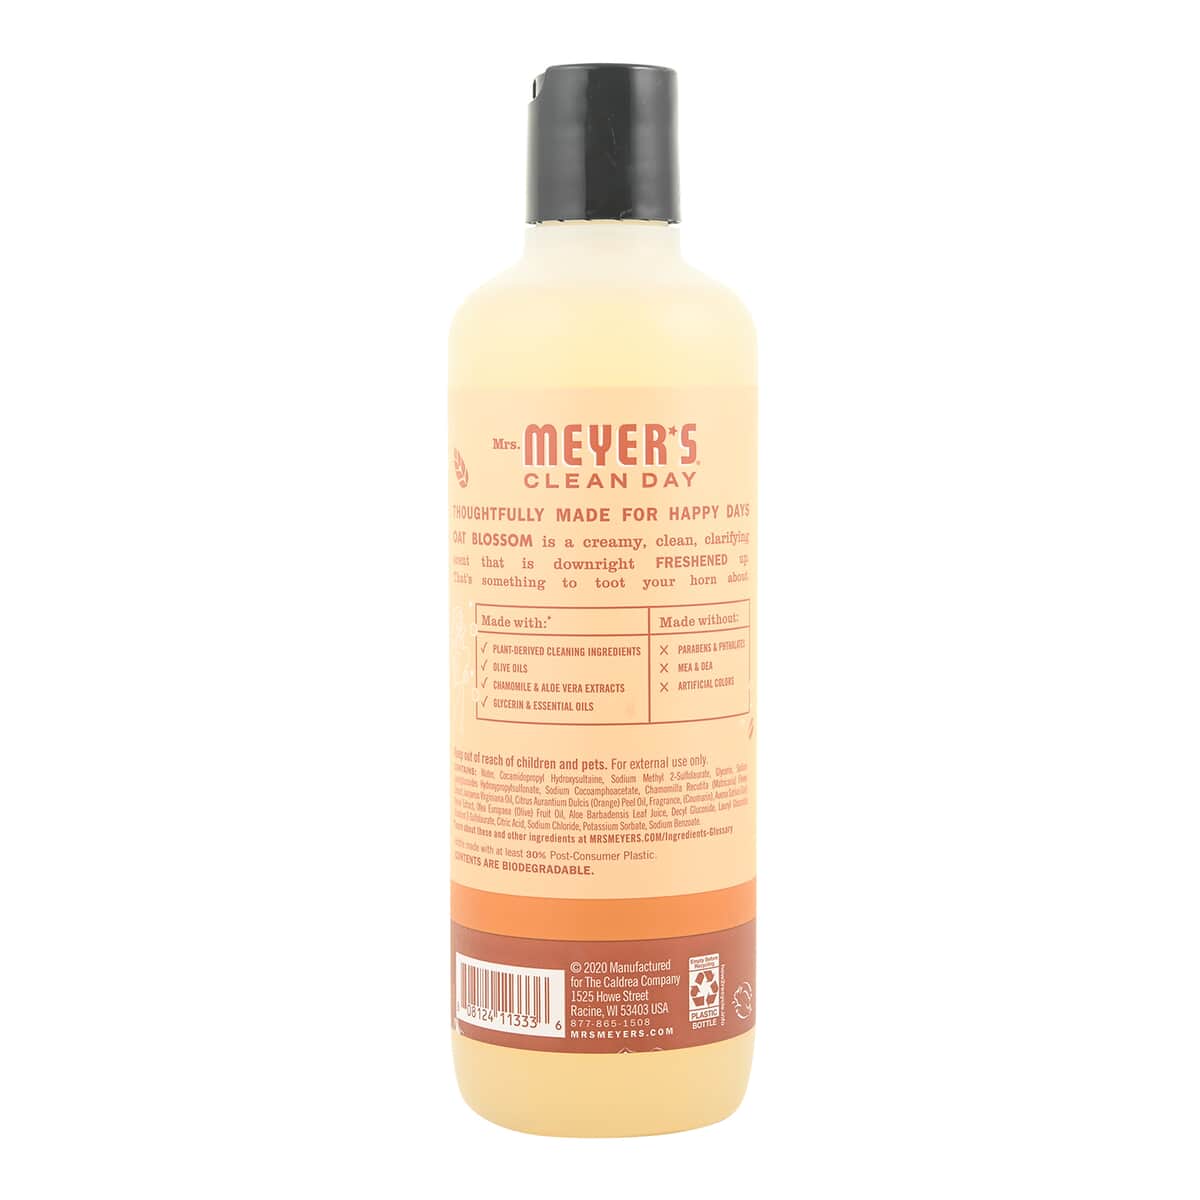 Mrs. Meyer's Clean Day Body Wash - Oat Blossom 16 oz image number 4